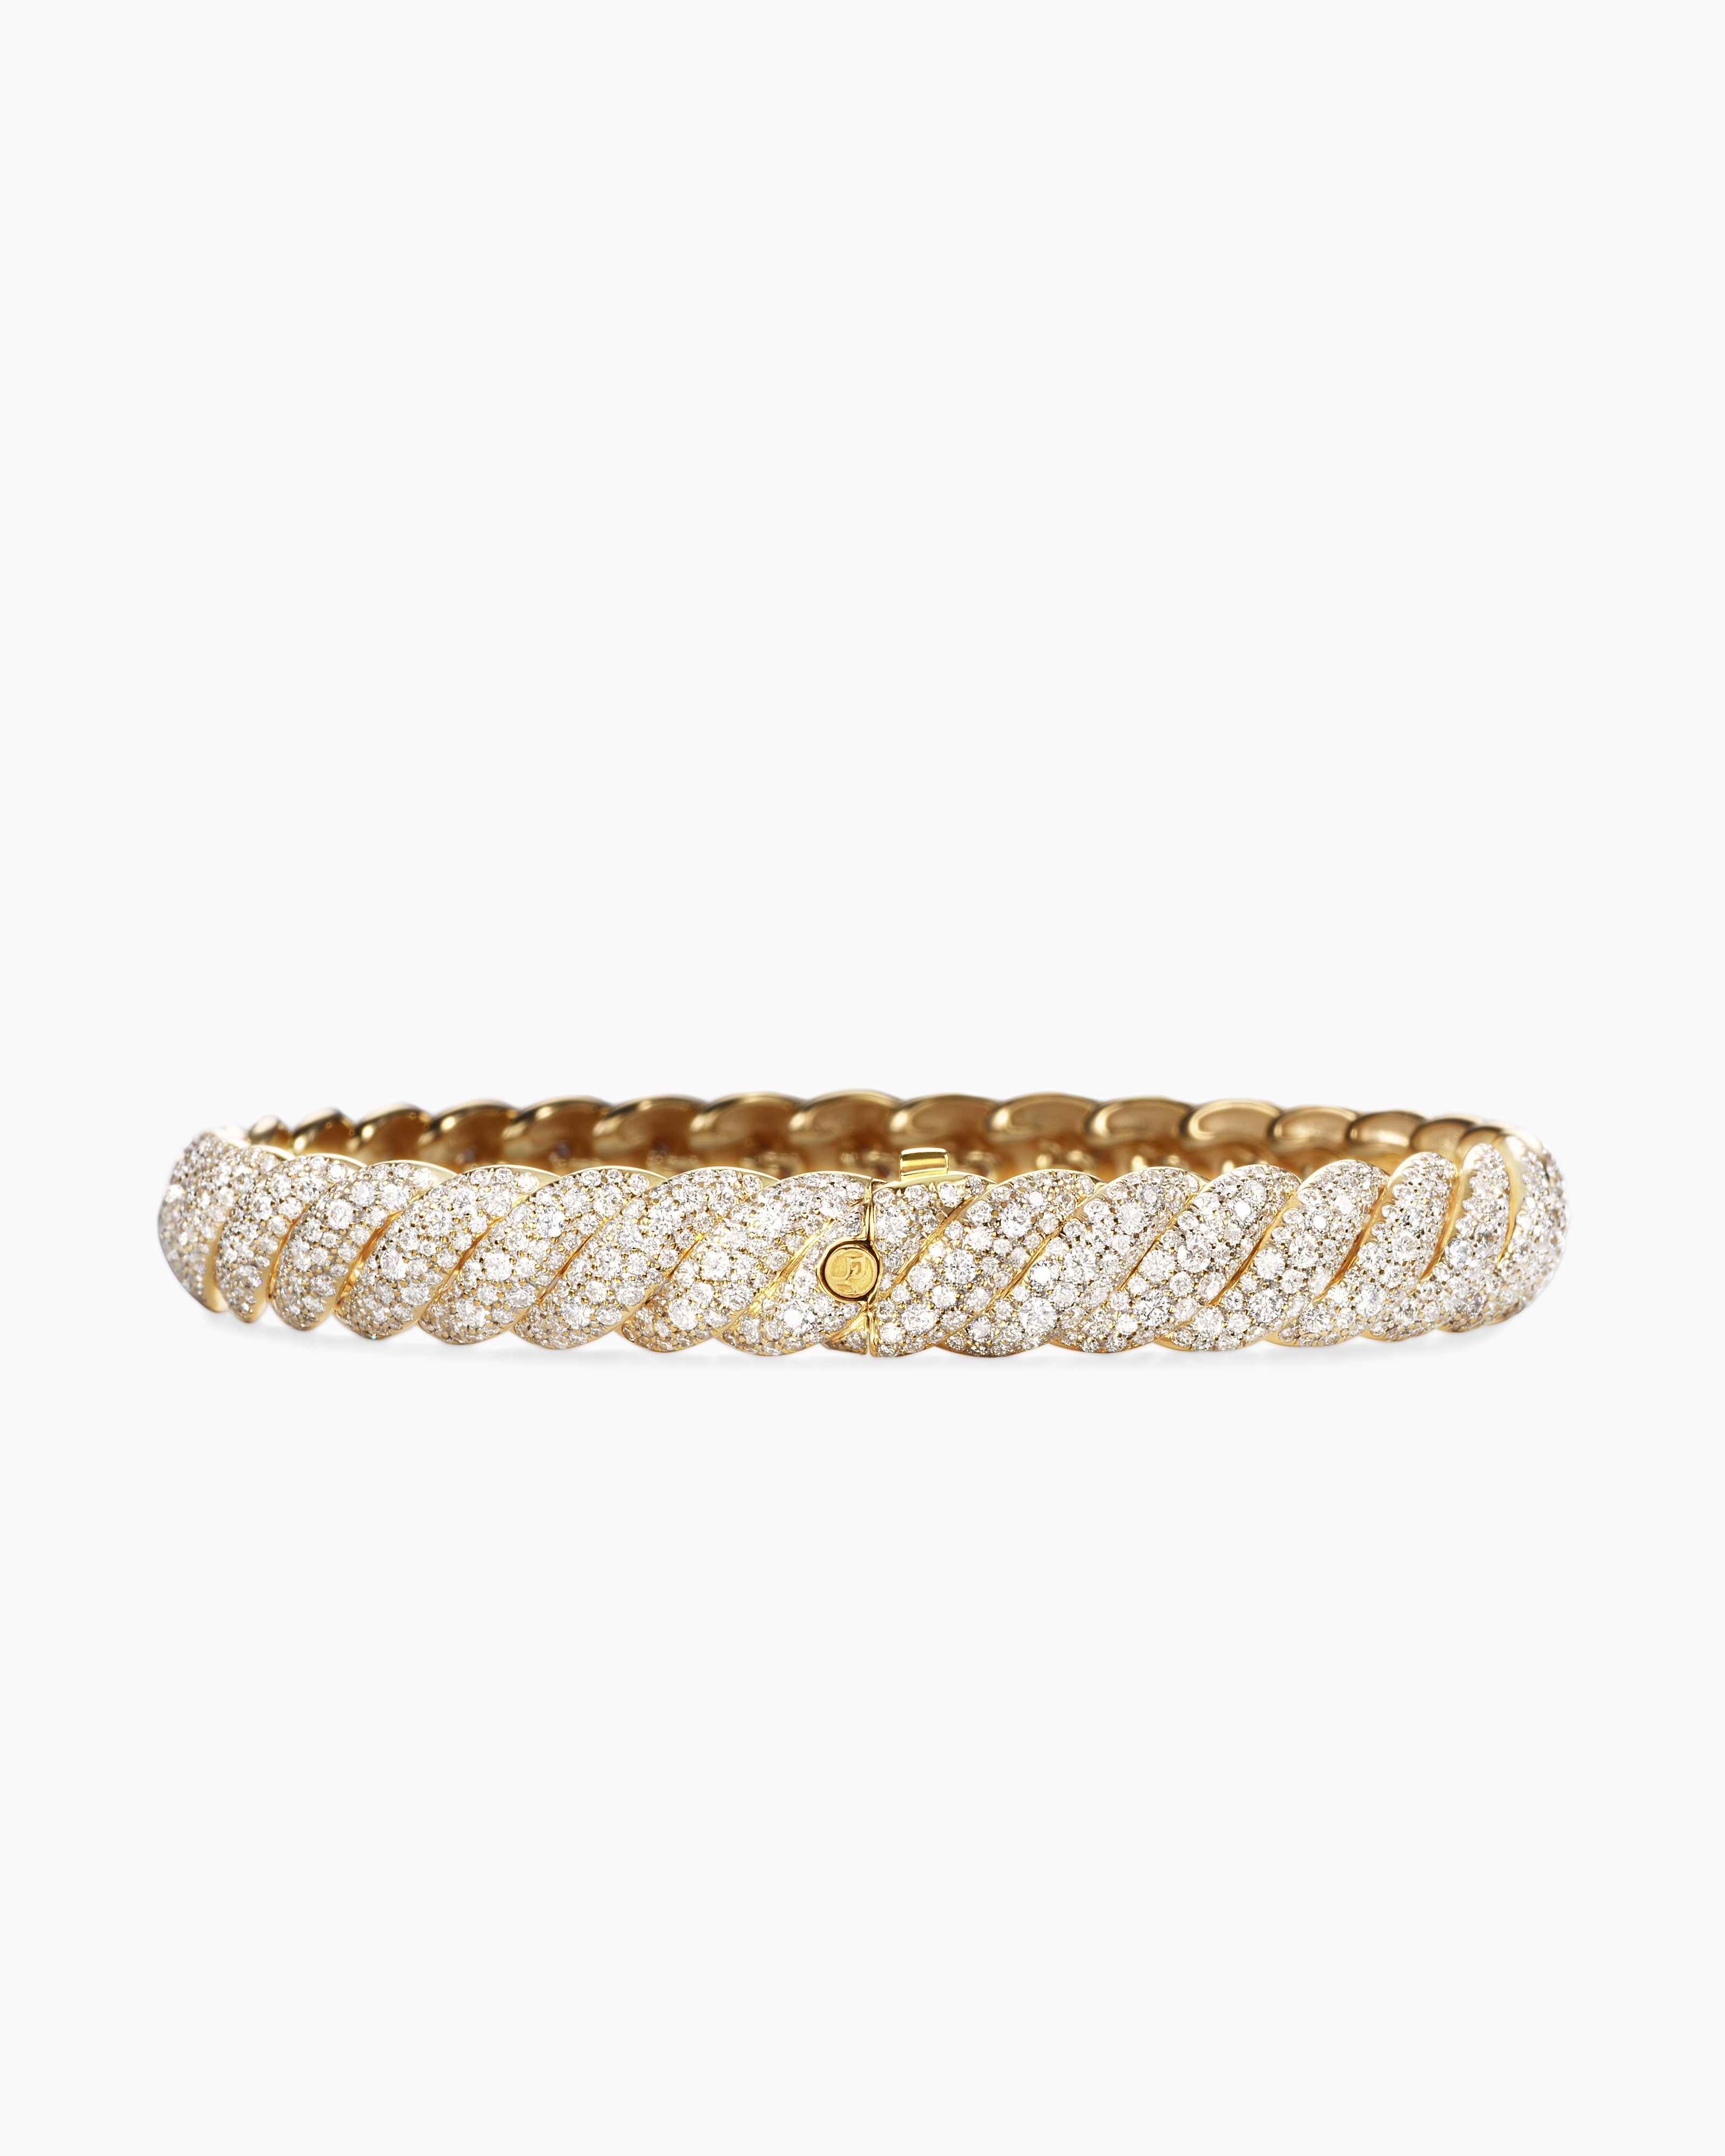 Sculpted Cable Bracelet in 18K Yellow Gold with Diamonds,